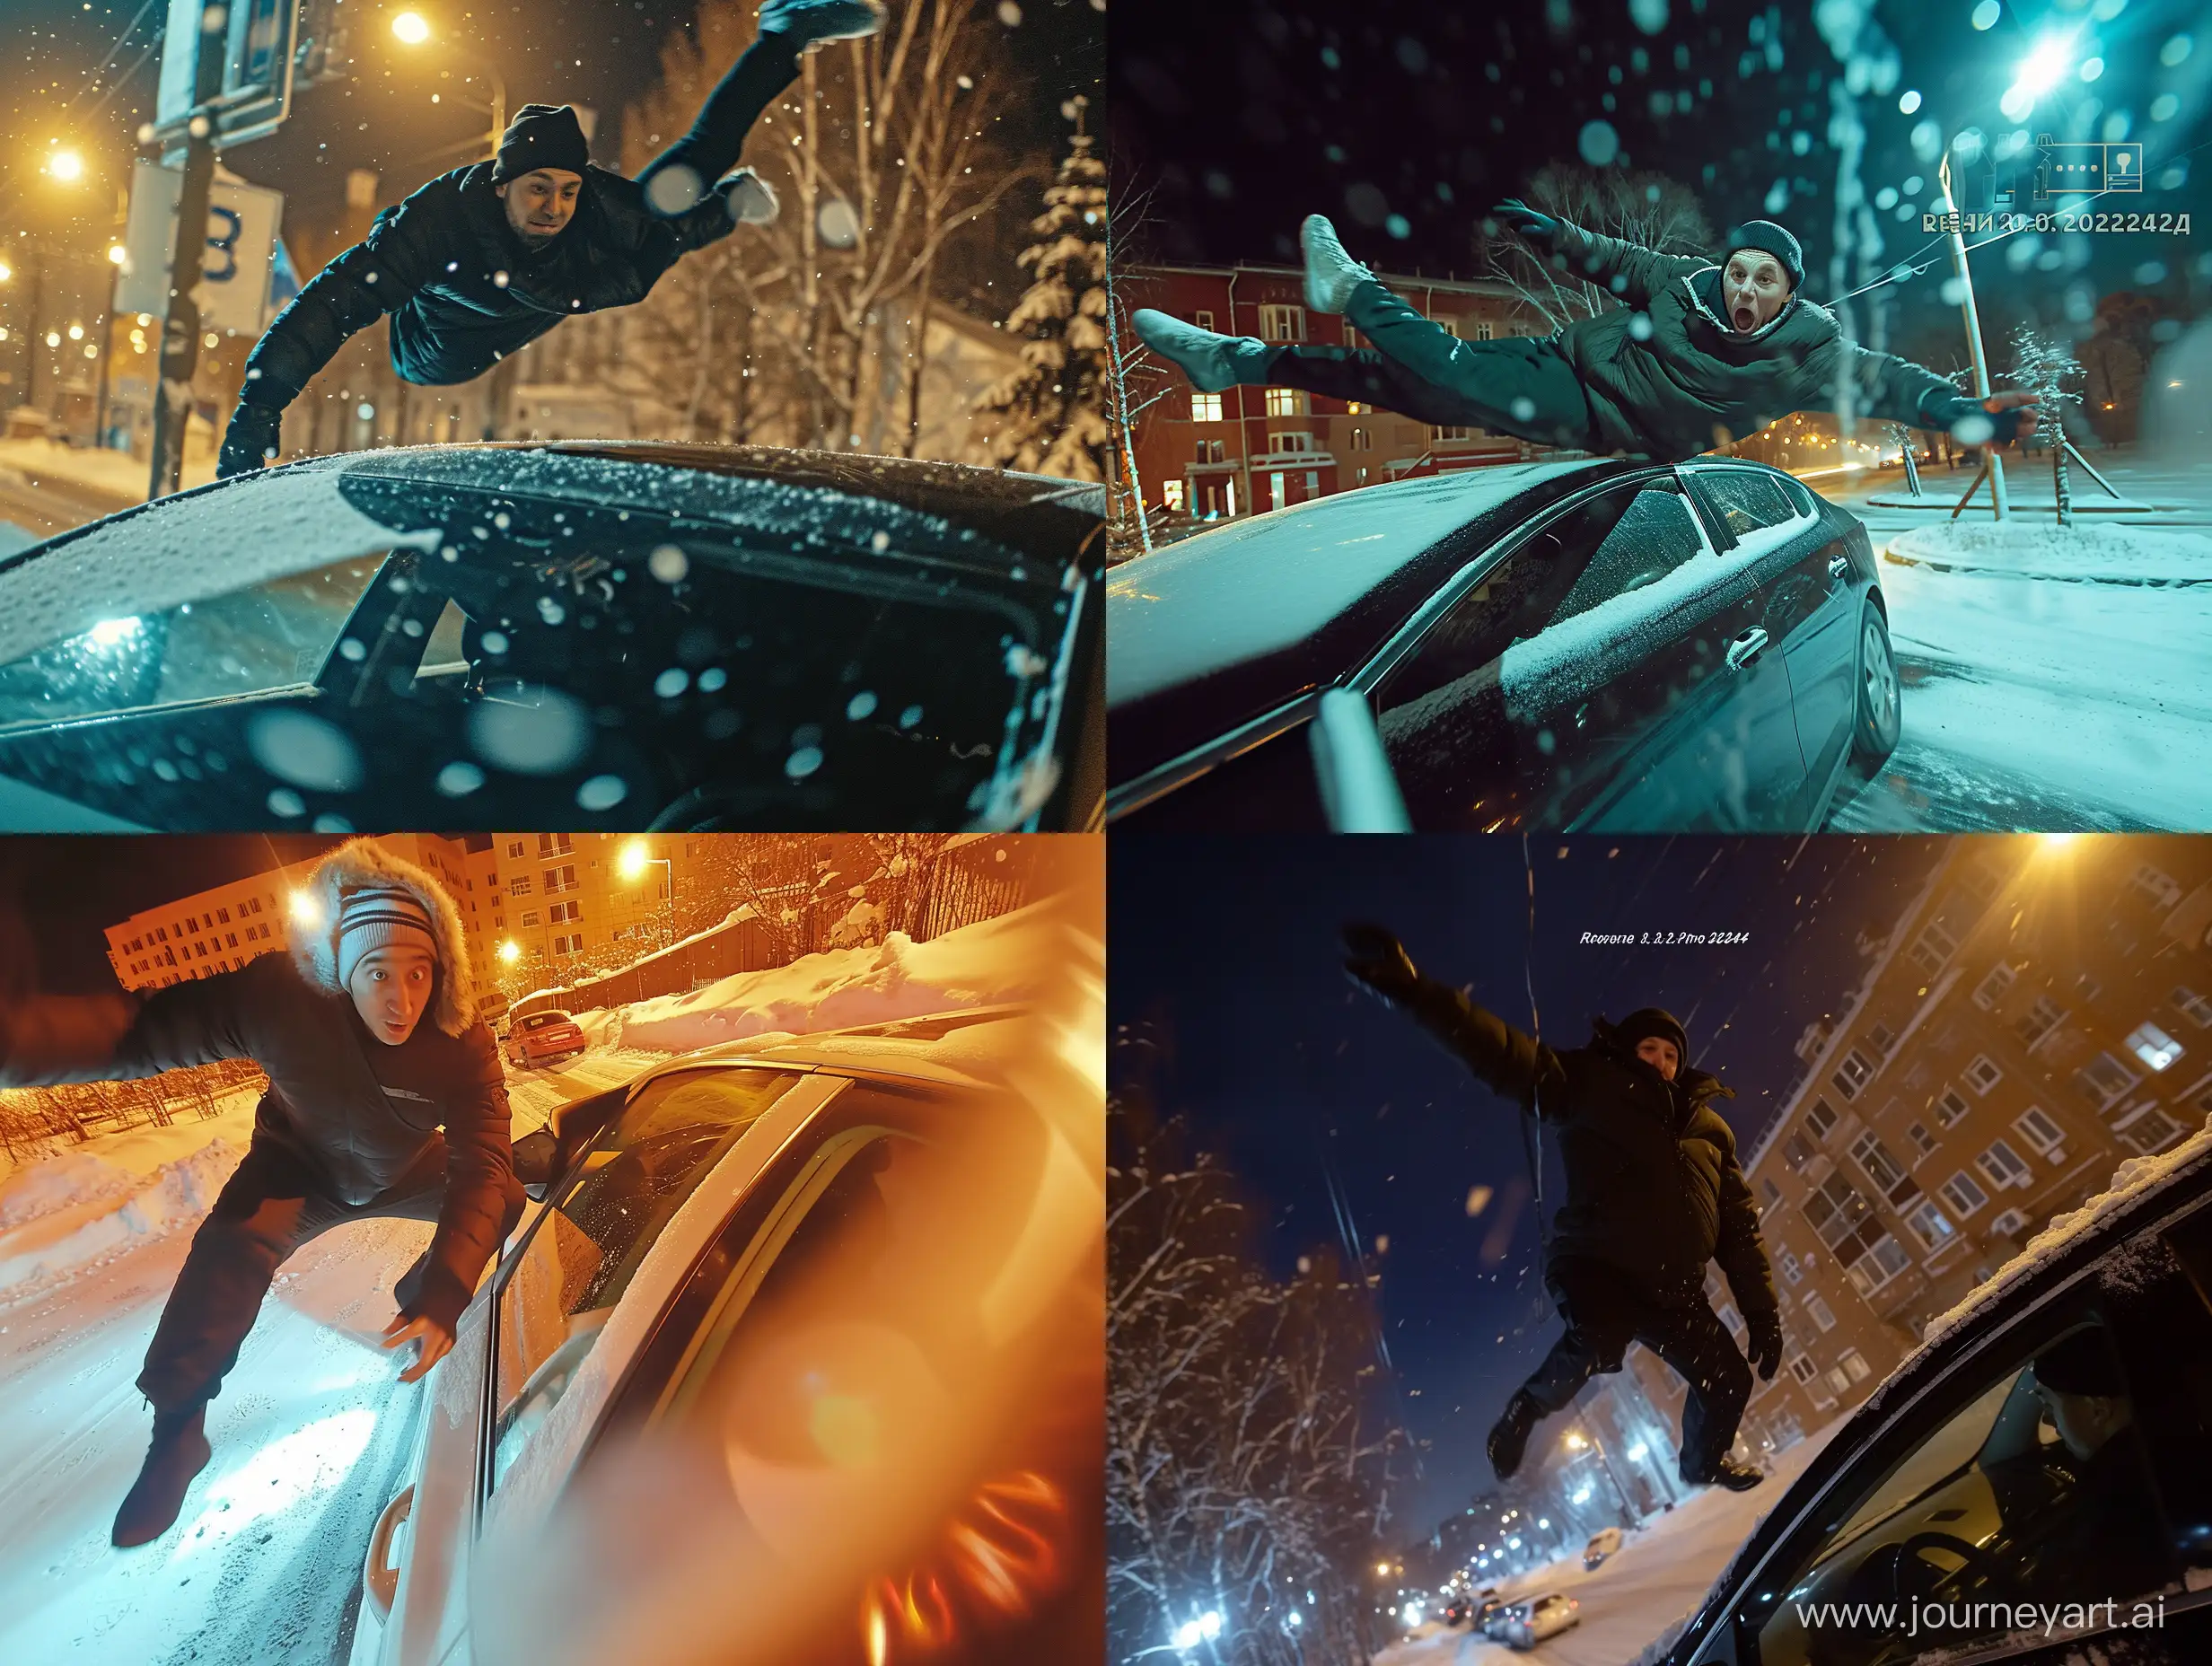 Man from the car made a somersault, winter weather in Russia at night, view from the window, surveillance photo, dynamic photo, video recording from video surveillance camera, fuzzy filter, video recording from video surveillance camera, on top the inscription "Recording 03.02.2024"